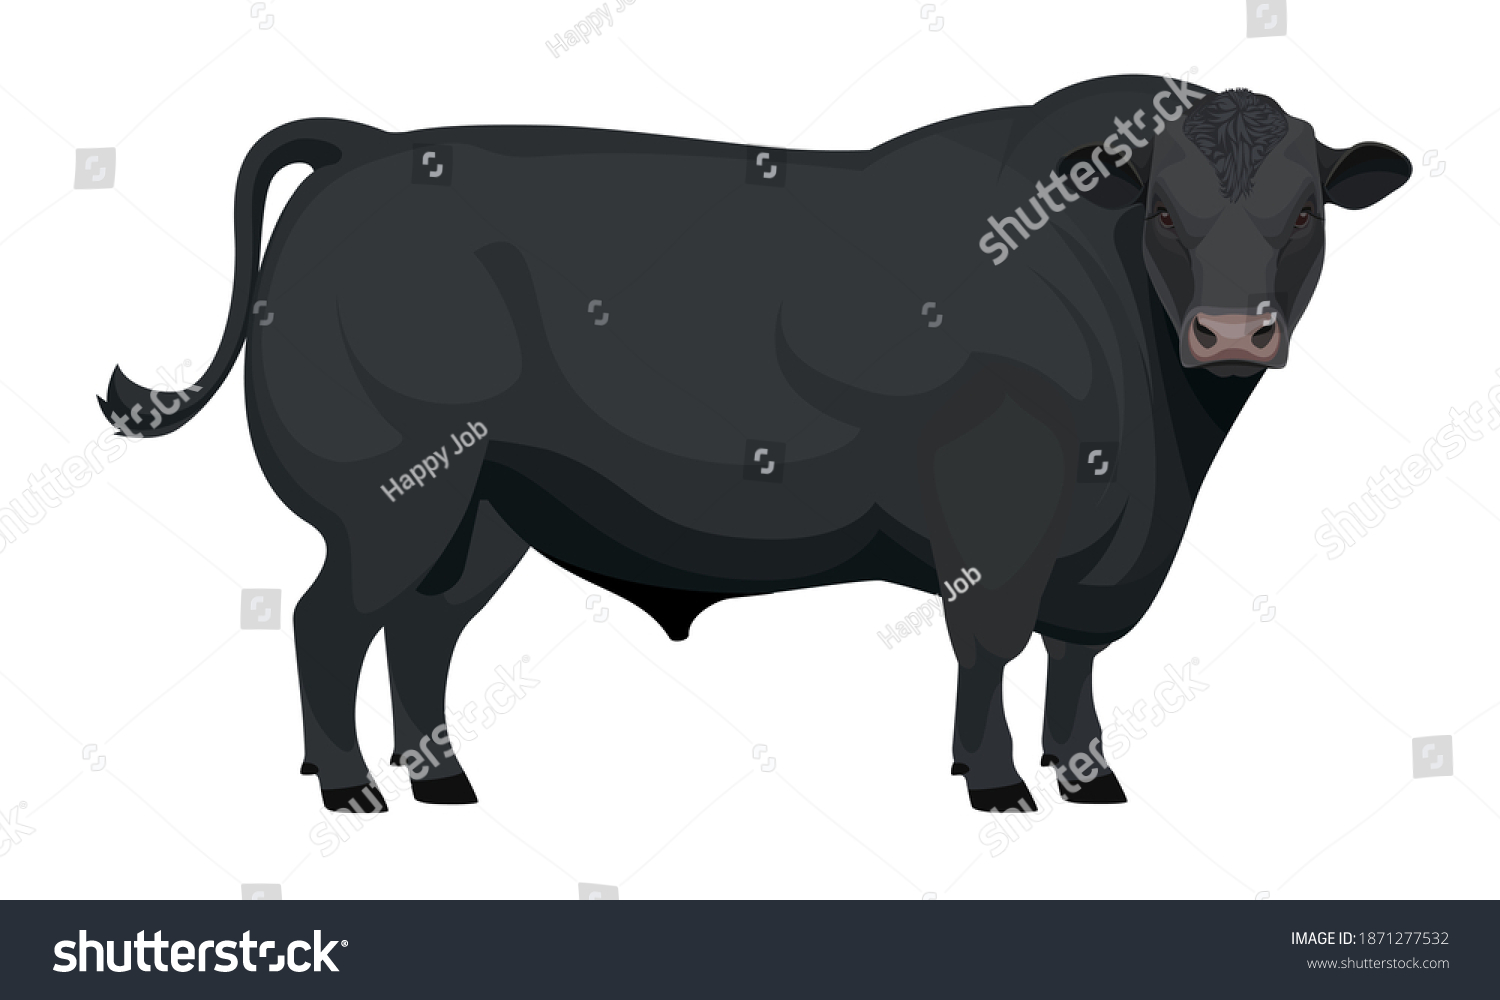 SVG of Farm animal - Bull. Aberdeen Angus - The Best Beef Cattle Breeds collection. Vector Illustration. svg